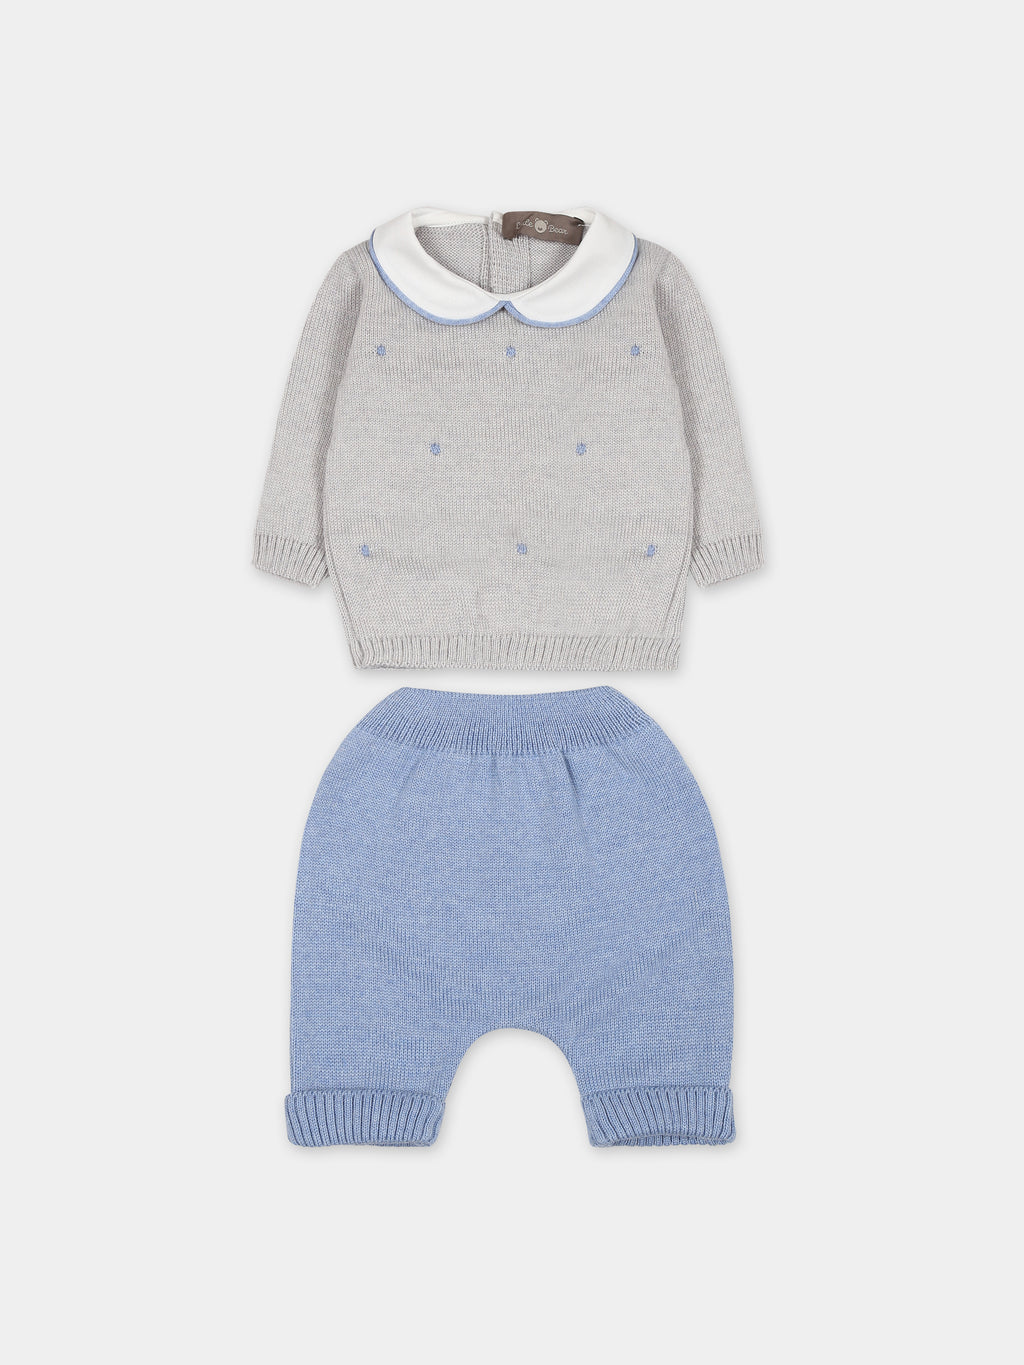 Multicolor suit for baby boy